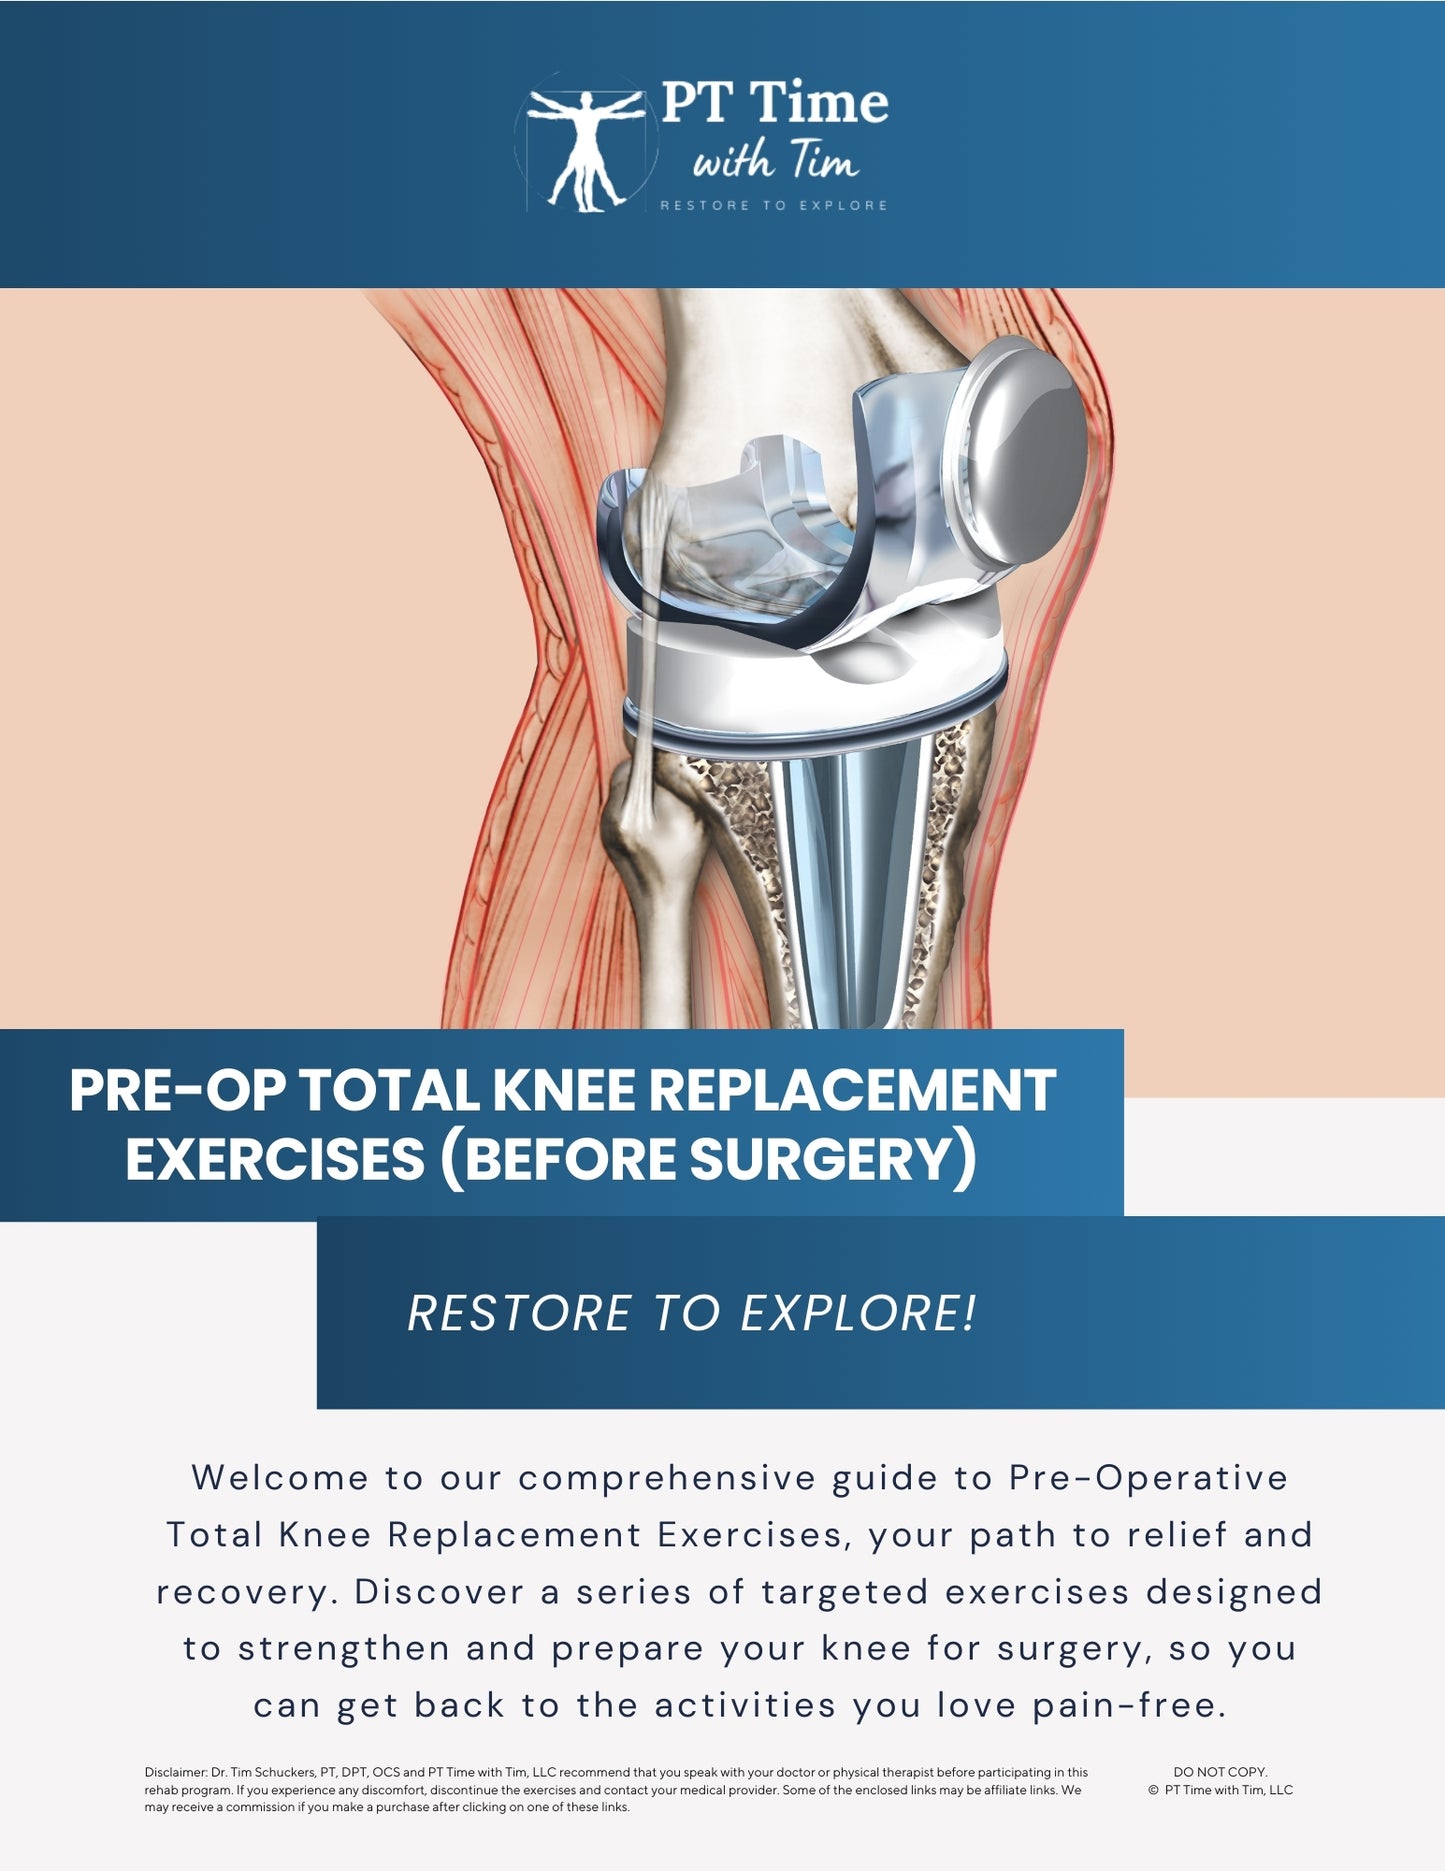 Pre-operative total knee replacement home exercises worksheet pdf before surgery